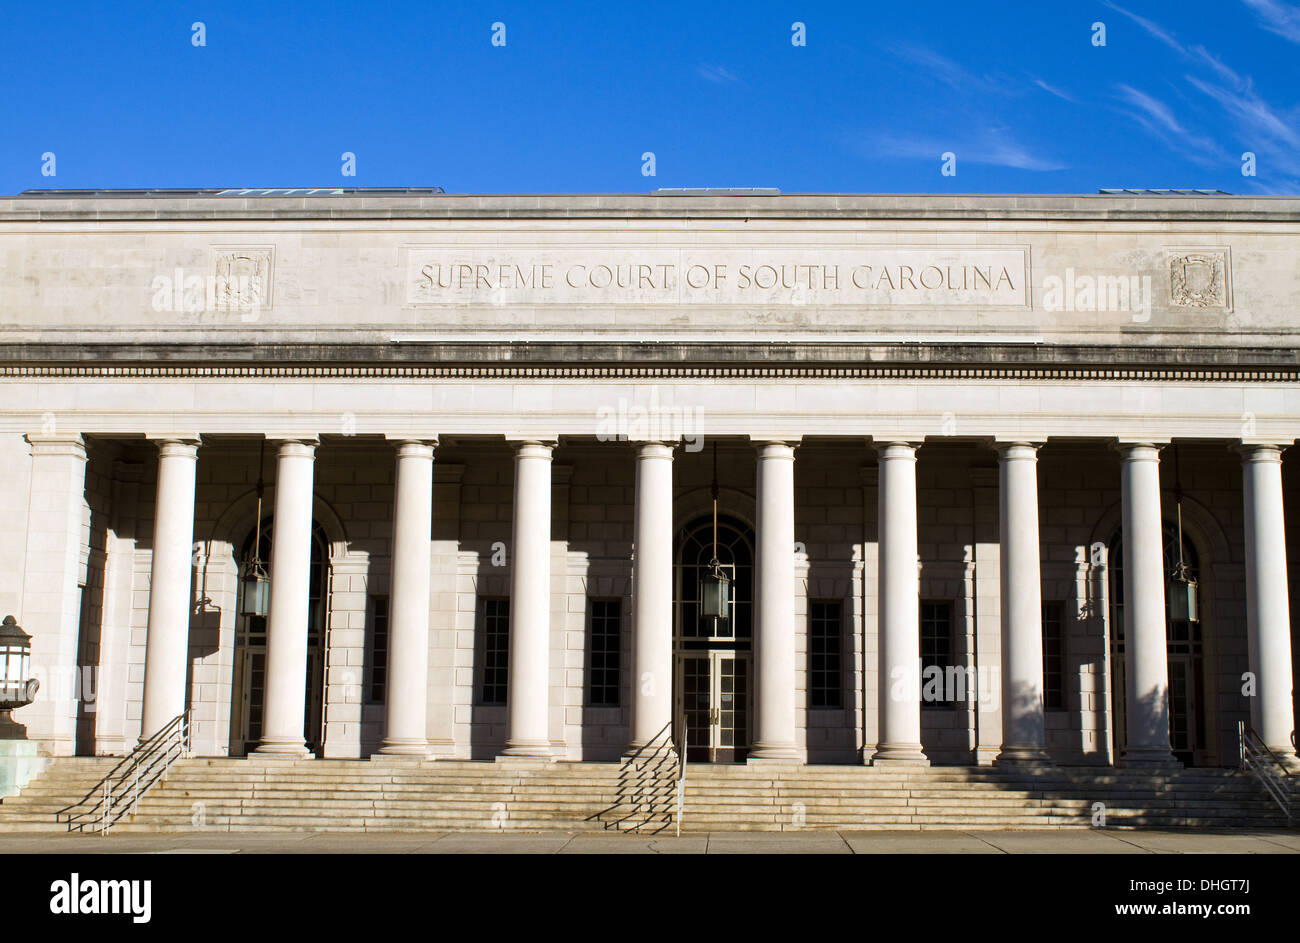 Supreme Court building of South Carolina located in Columbia, SC, USA. Stock Photo